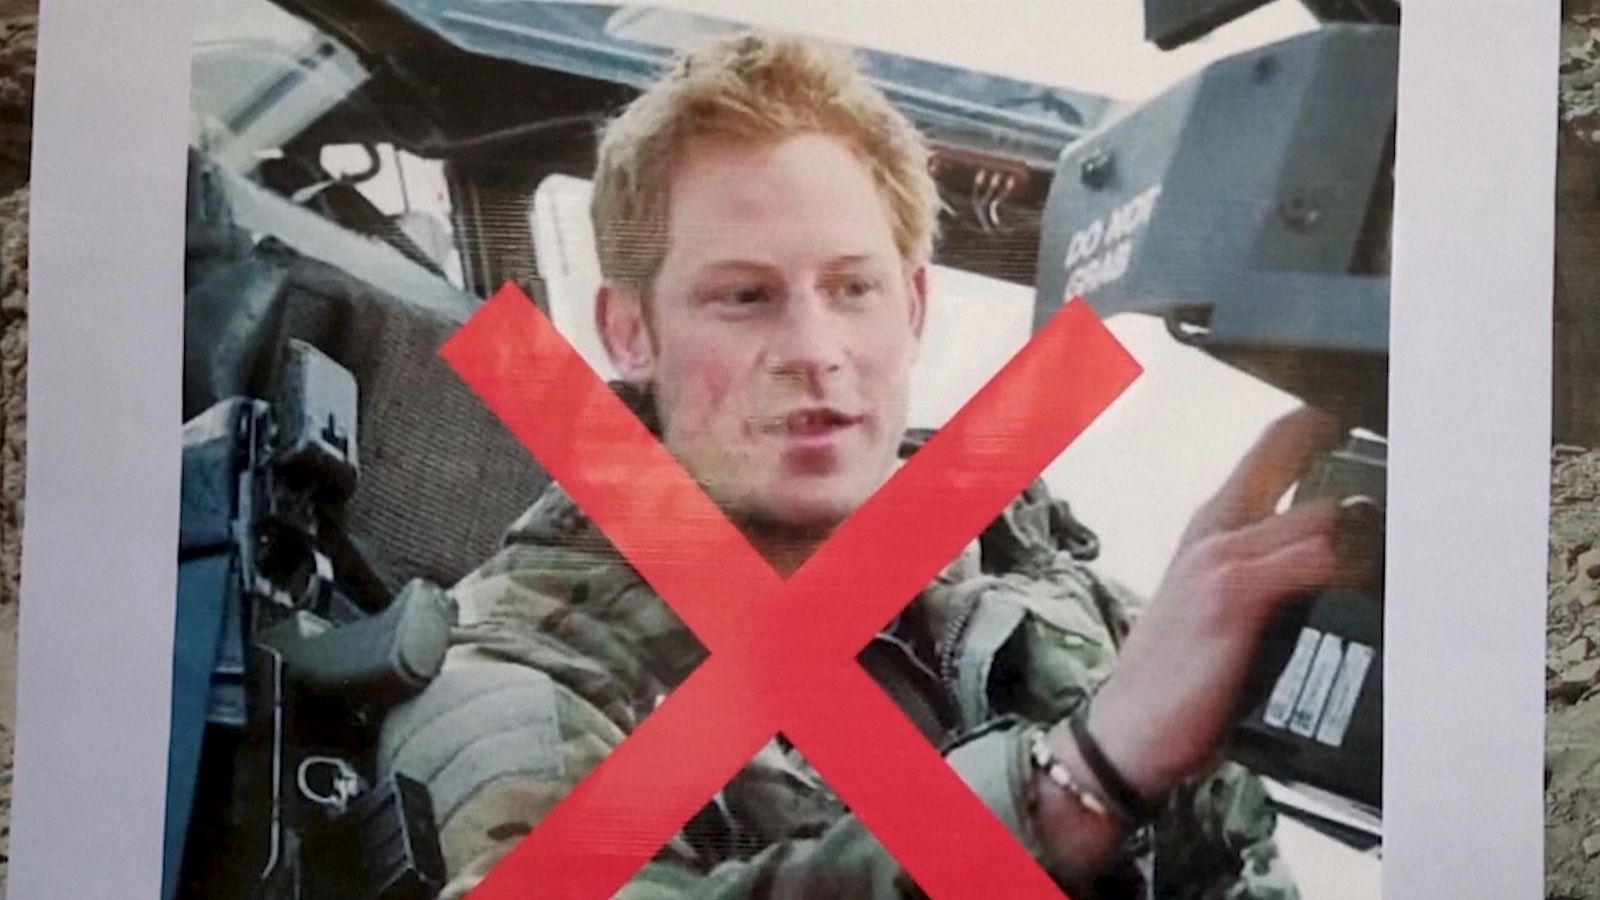 Afghans call for Prince Harry to be 'put on trial' after 'proudly' admitting to 'killing 25 Taliban'